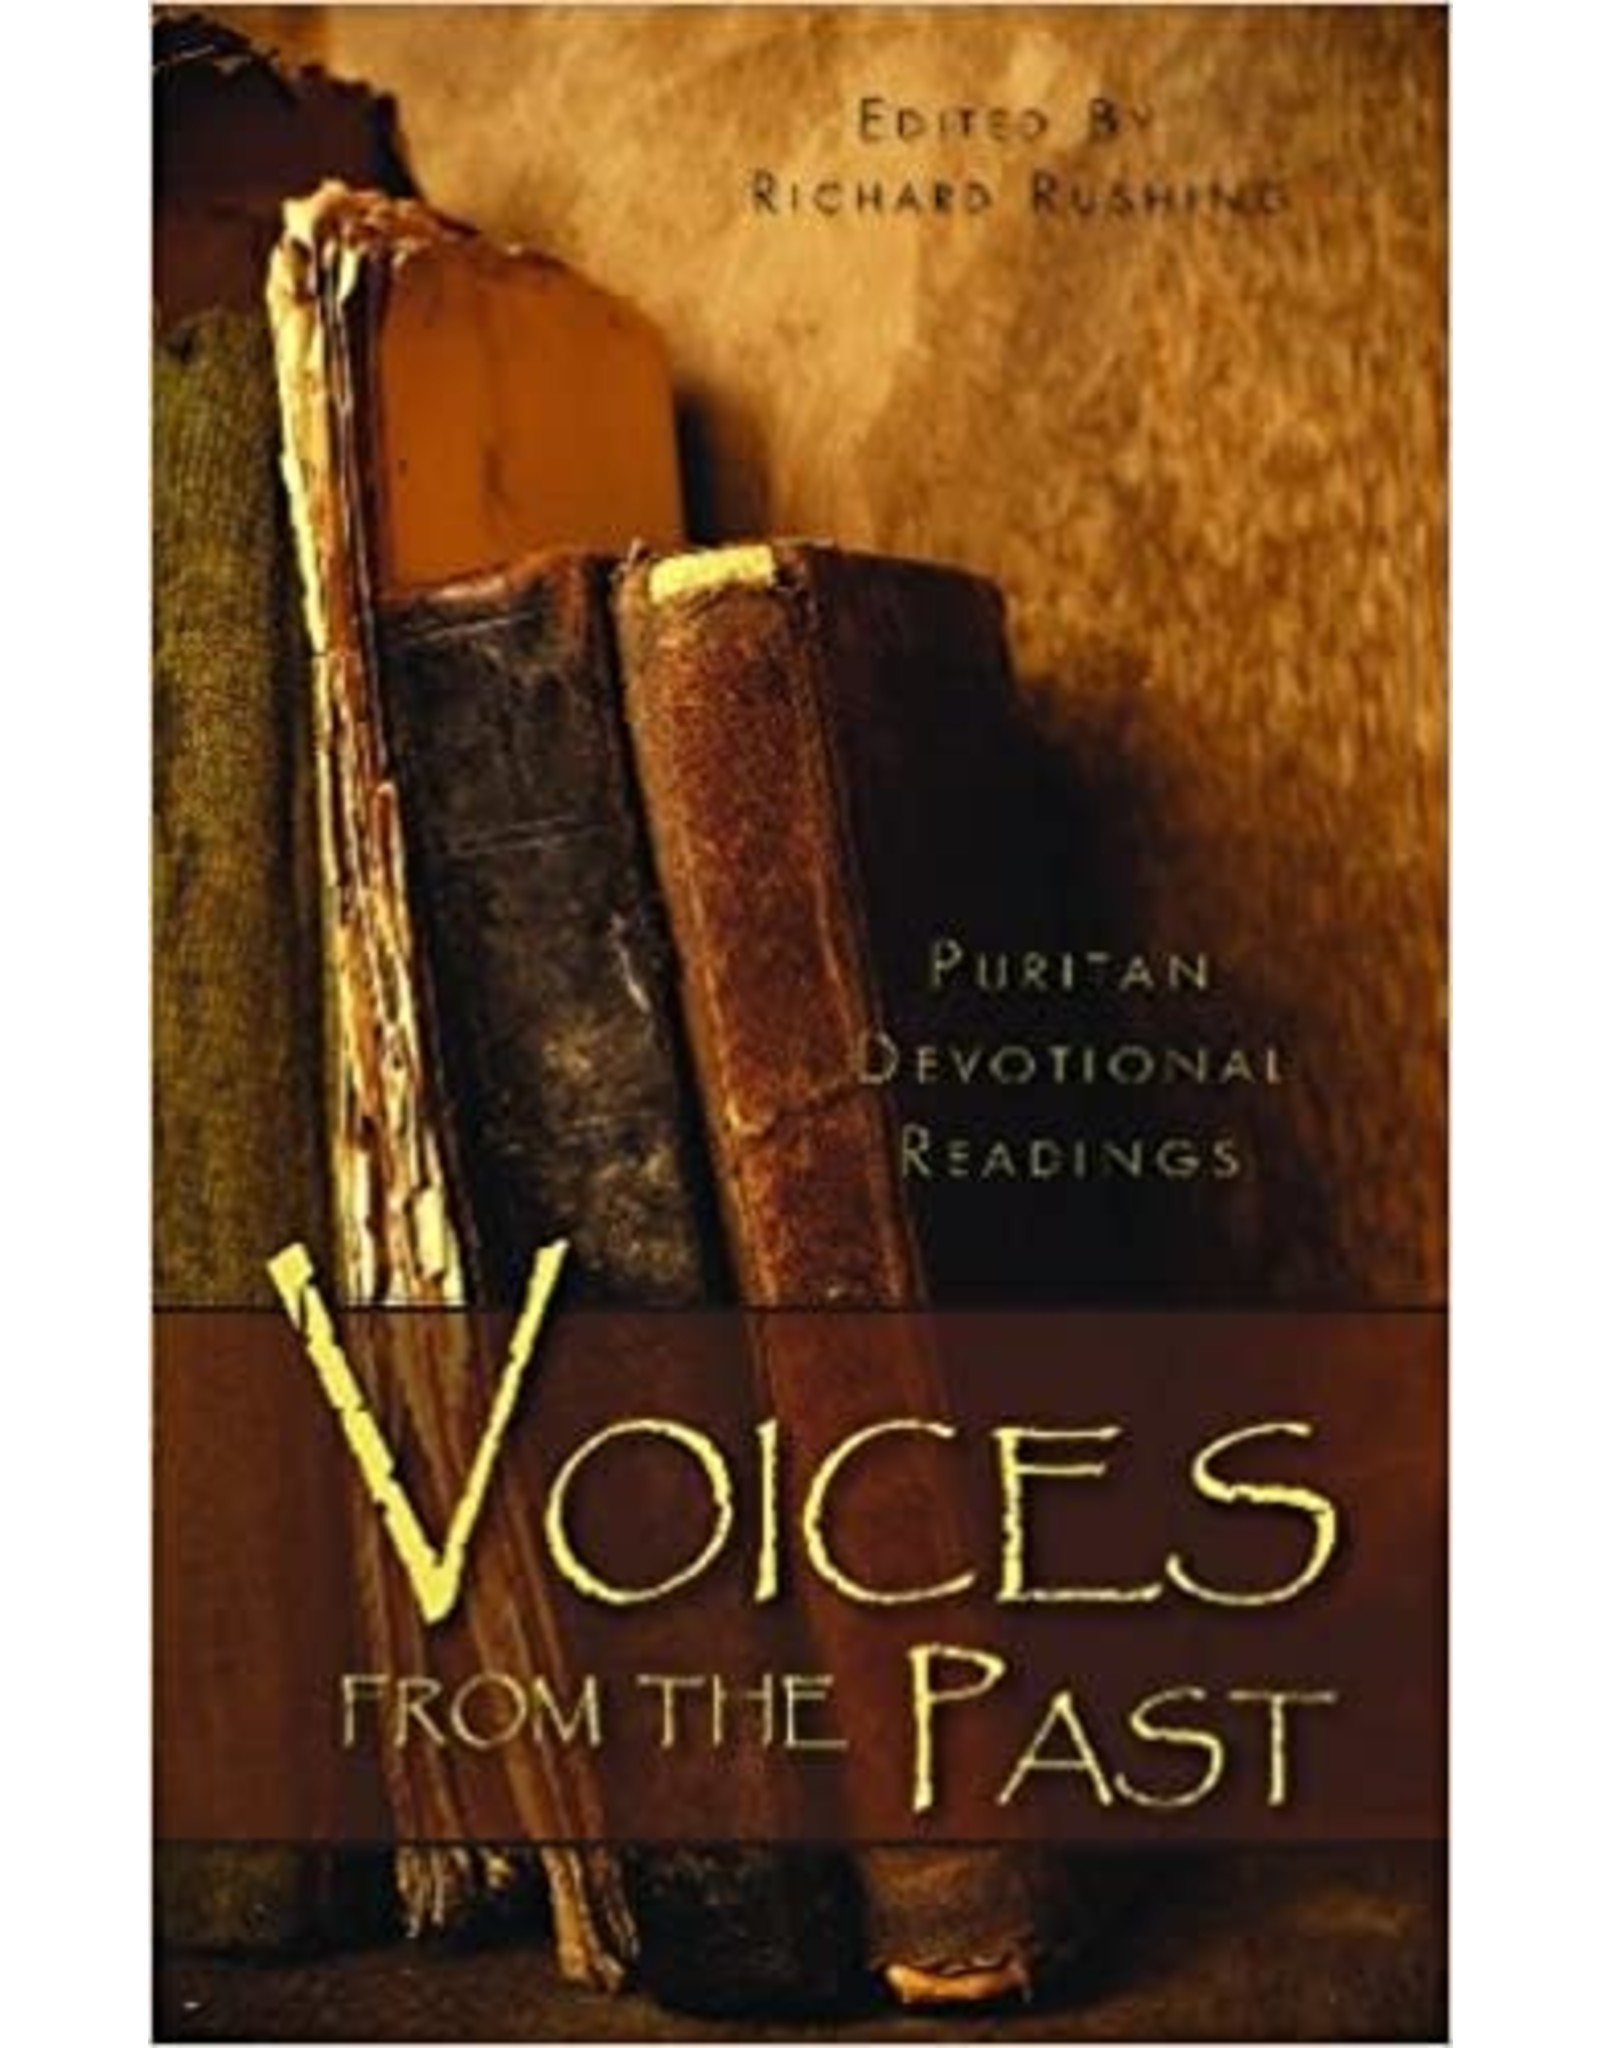 Richard Rushing Voices From the Past, Vol 1